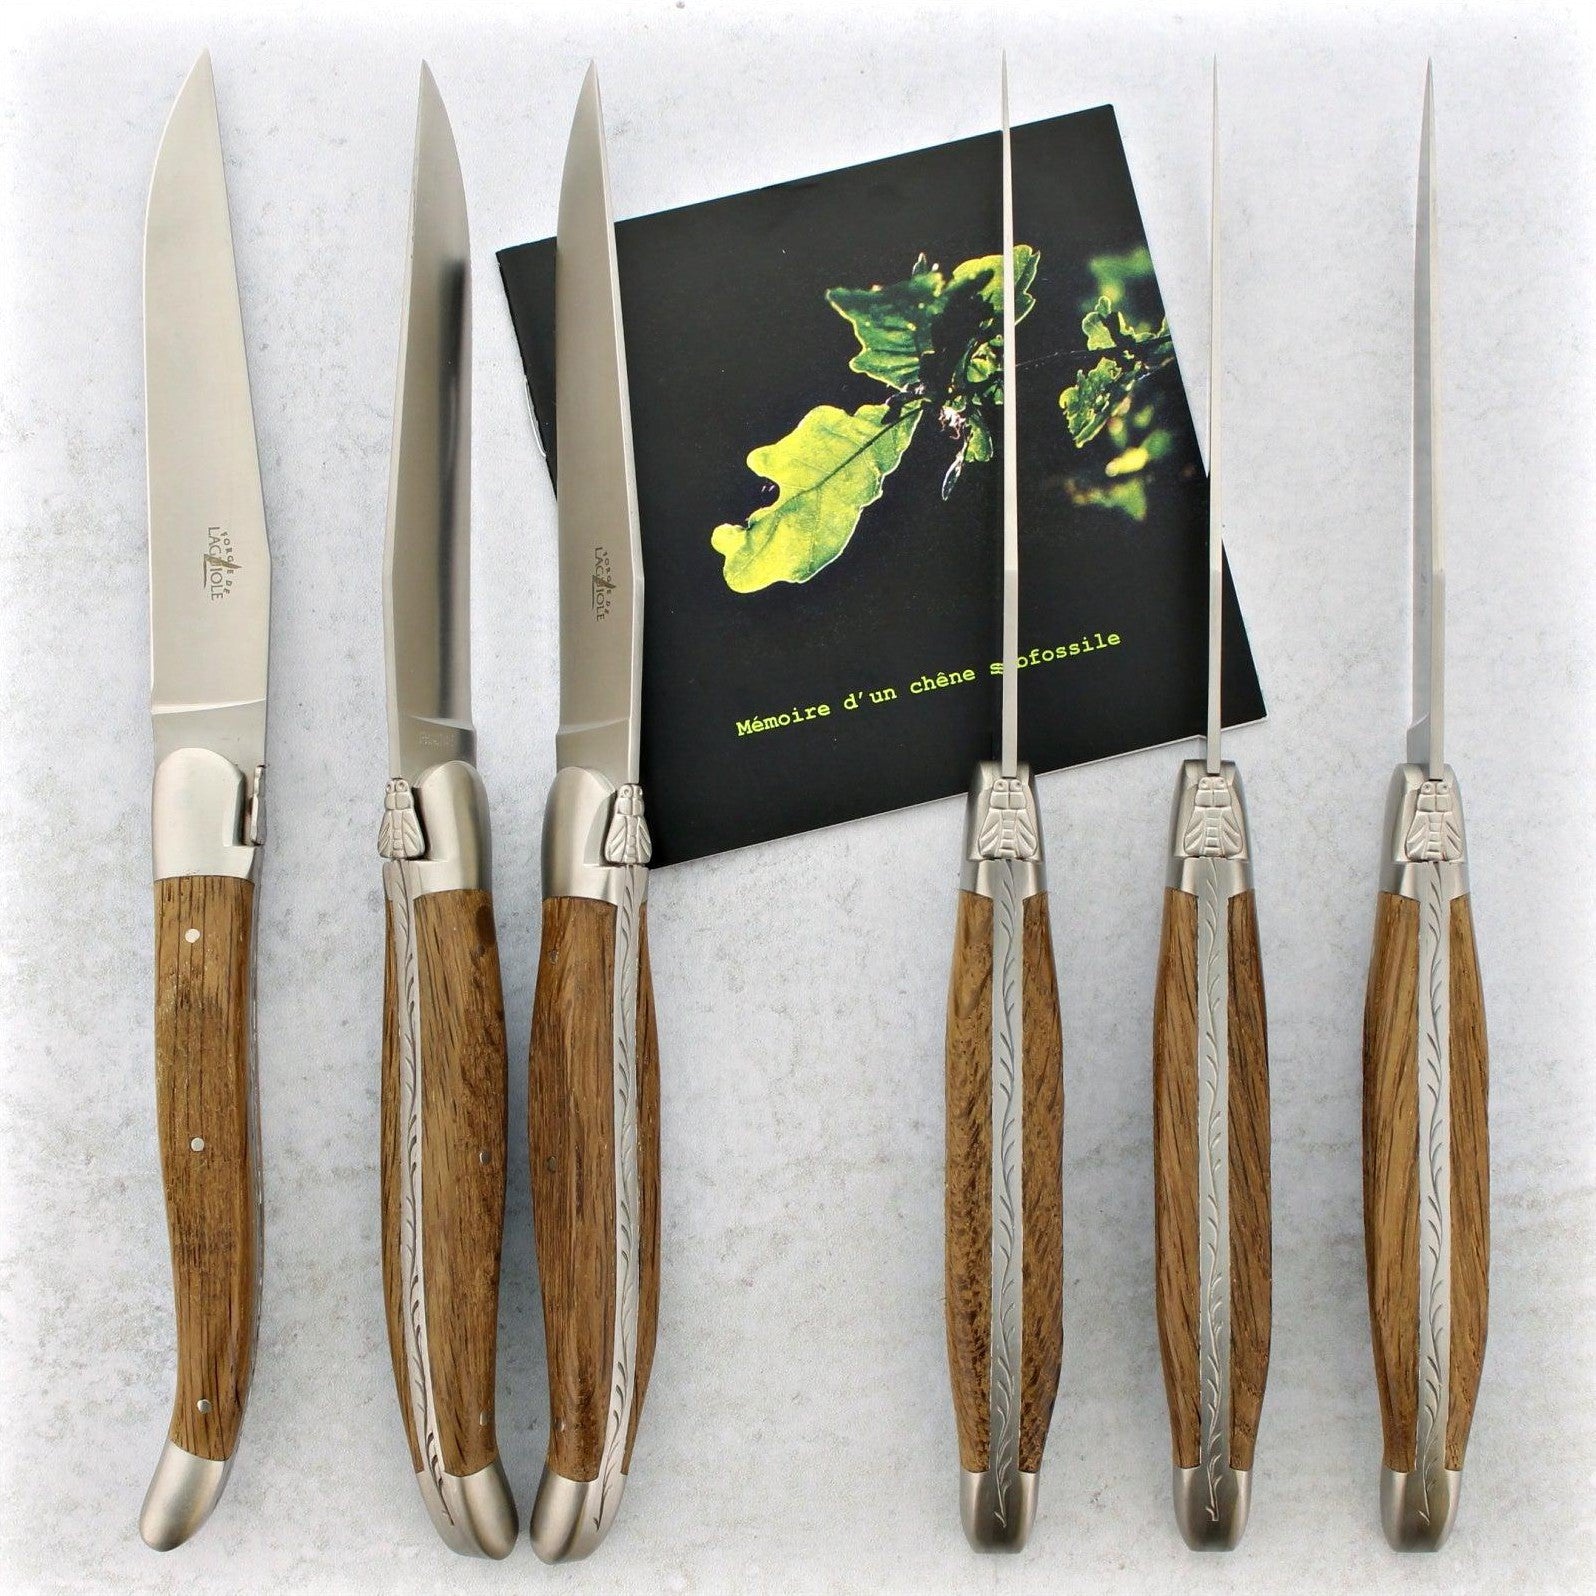 Set of 6 laguiole steak knives with Yew wood handle and stainless steel  bolsters